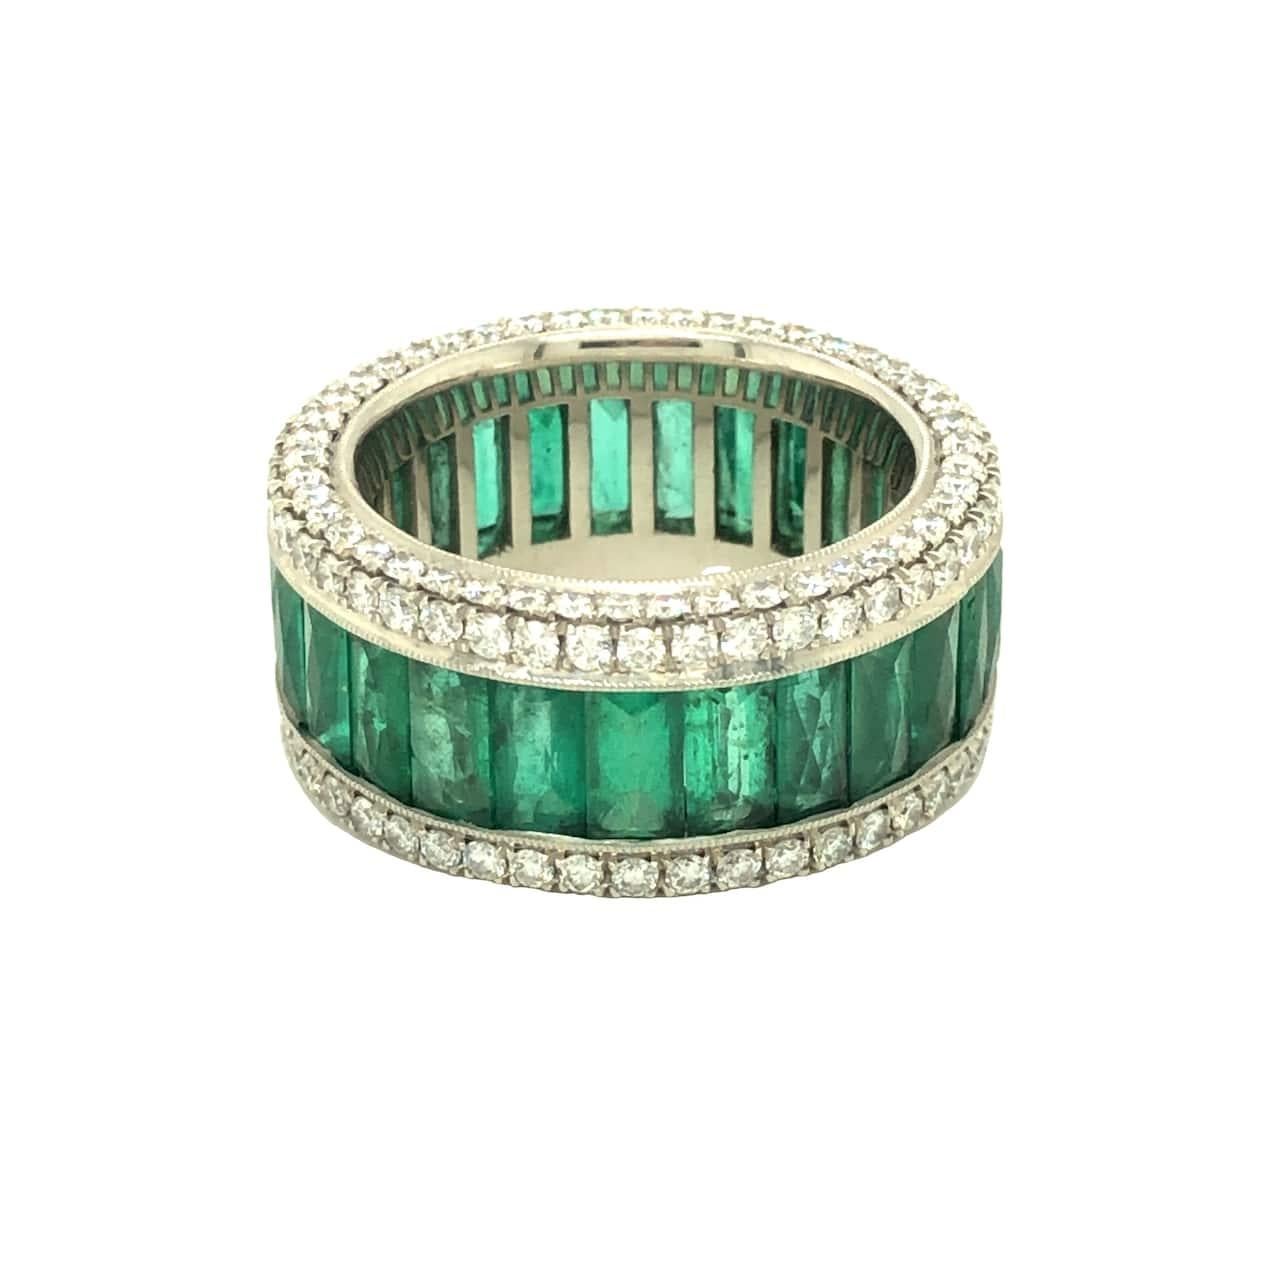 Beautiful fine detail and craftsmanship surely makes this ring special. Matching French cut emeralds are set in channel setting with fine milgrain and framed with colorless diamonds. On either sides of the band, small diamonds continue to add